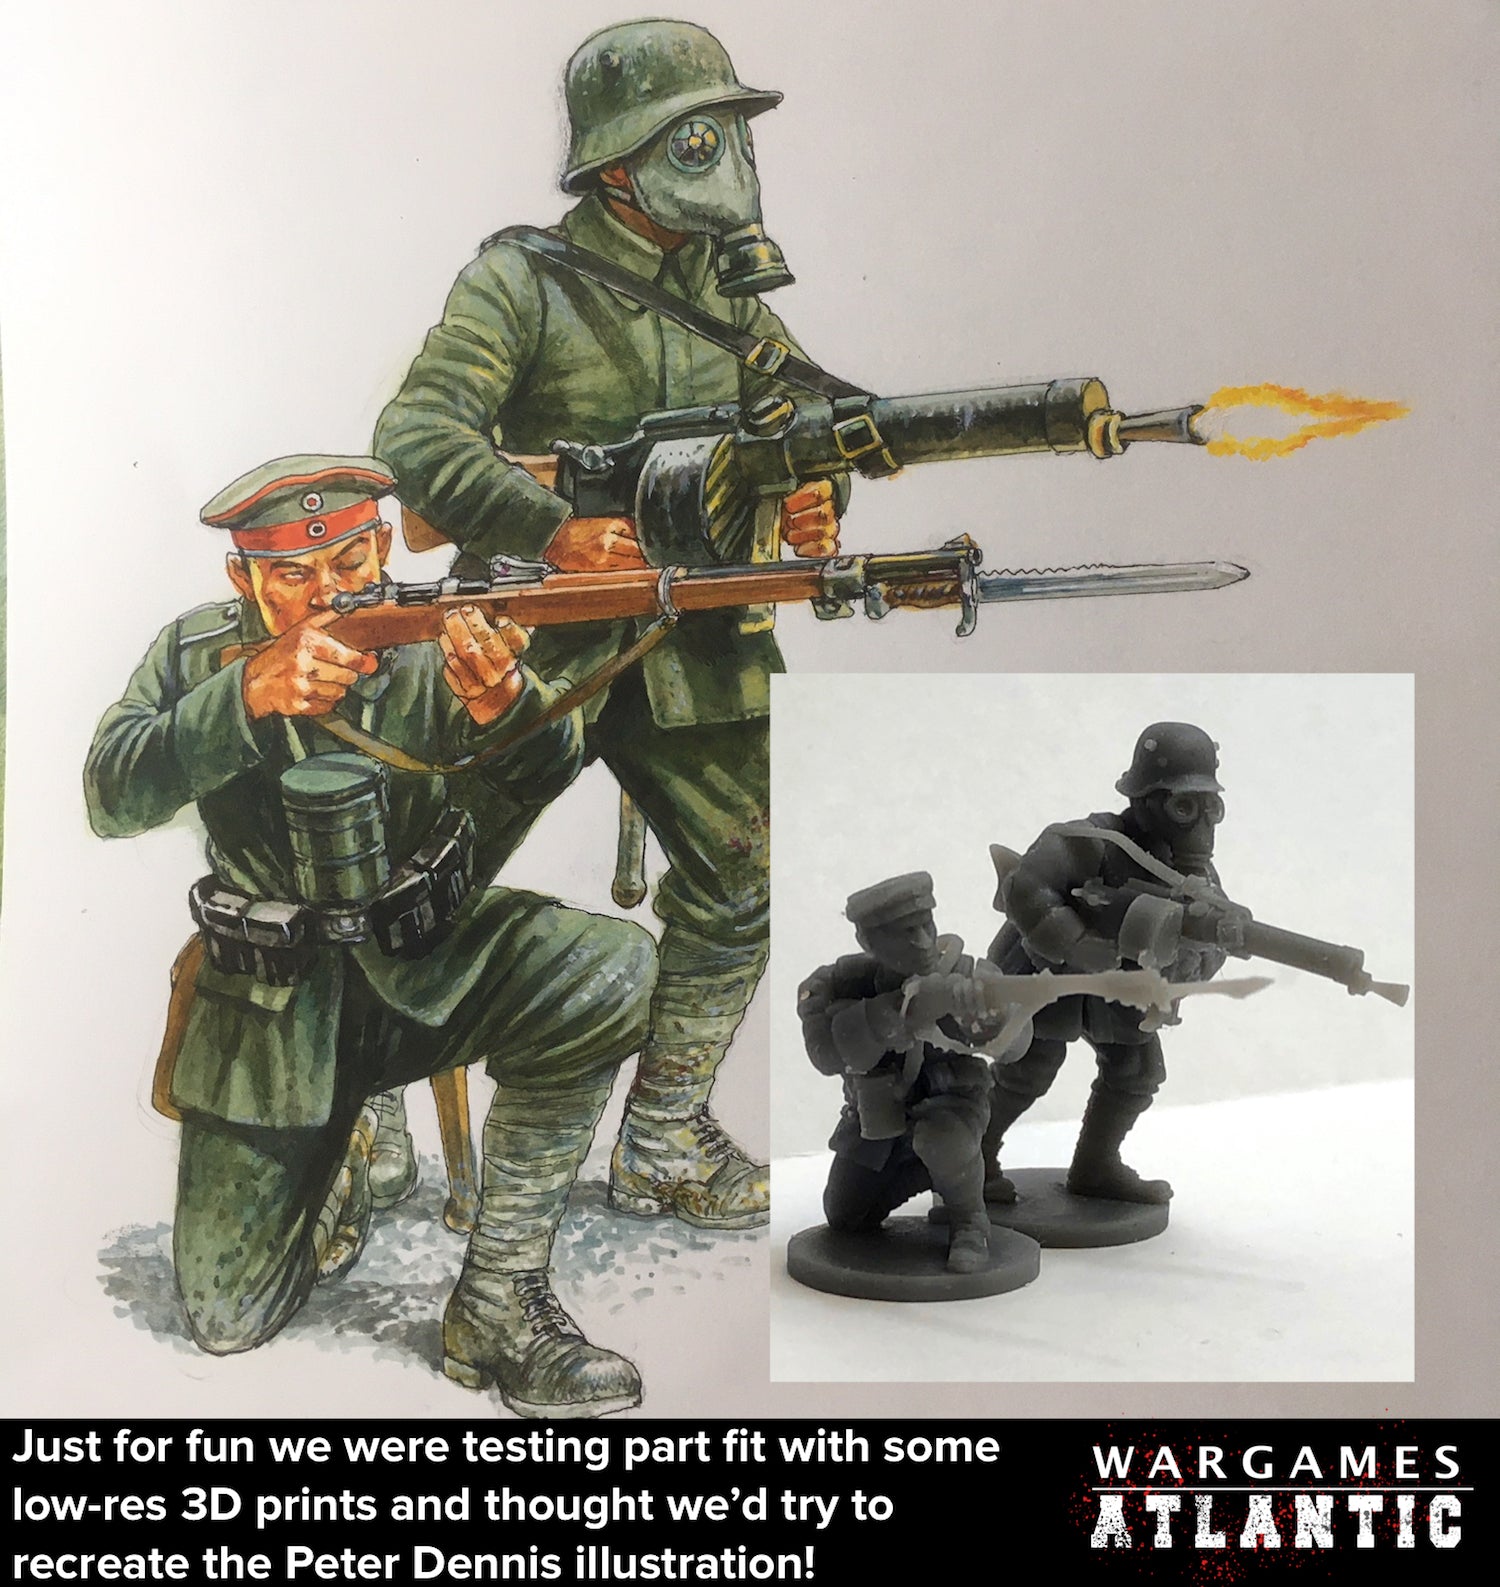 Playing with WW1 3D Prints